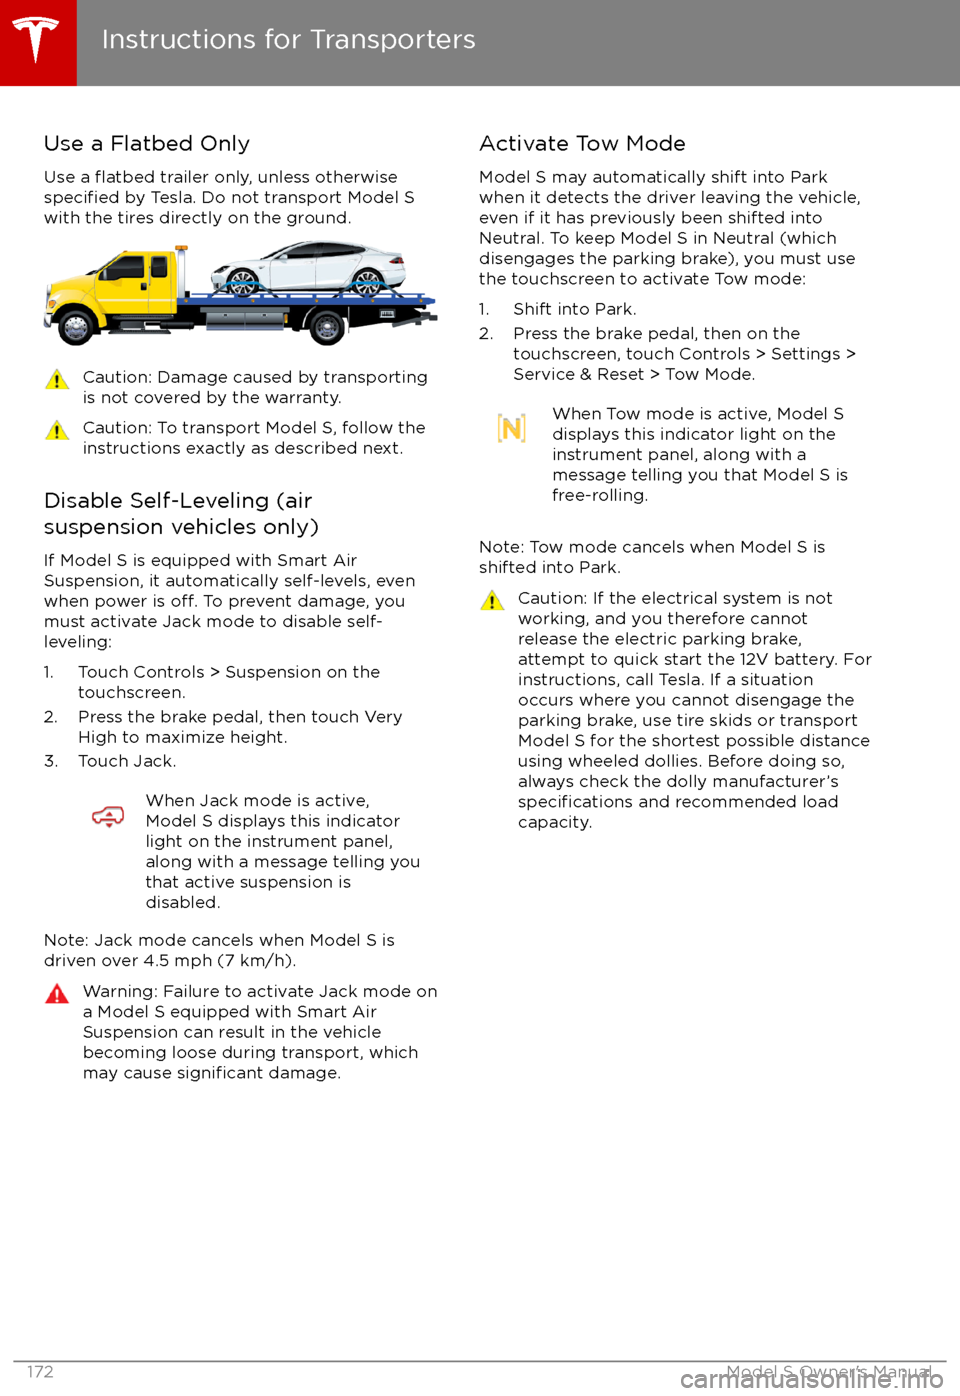 TESLA MODEL S 2017  Owners Manual Use a Flatbed OnlyUse a 
flatbed trailer only, unless otherwisespecified by Tesla. Do not transport Model S
with the tires directly on the ground.
Caution: Damage caused by transporting is not covered